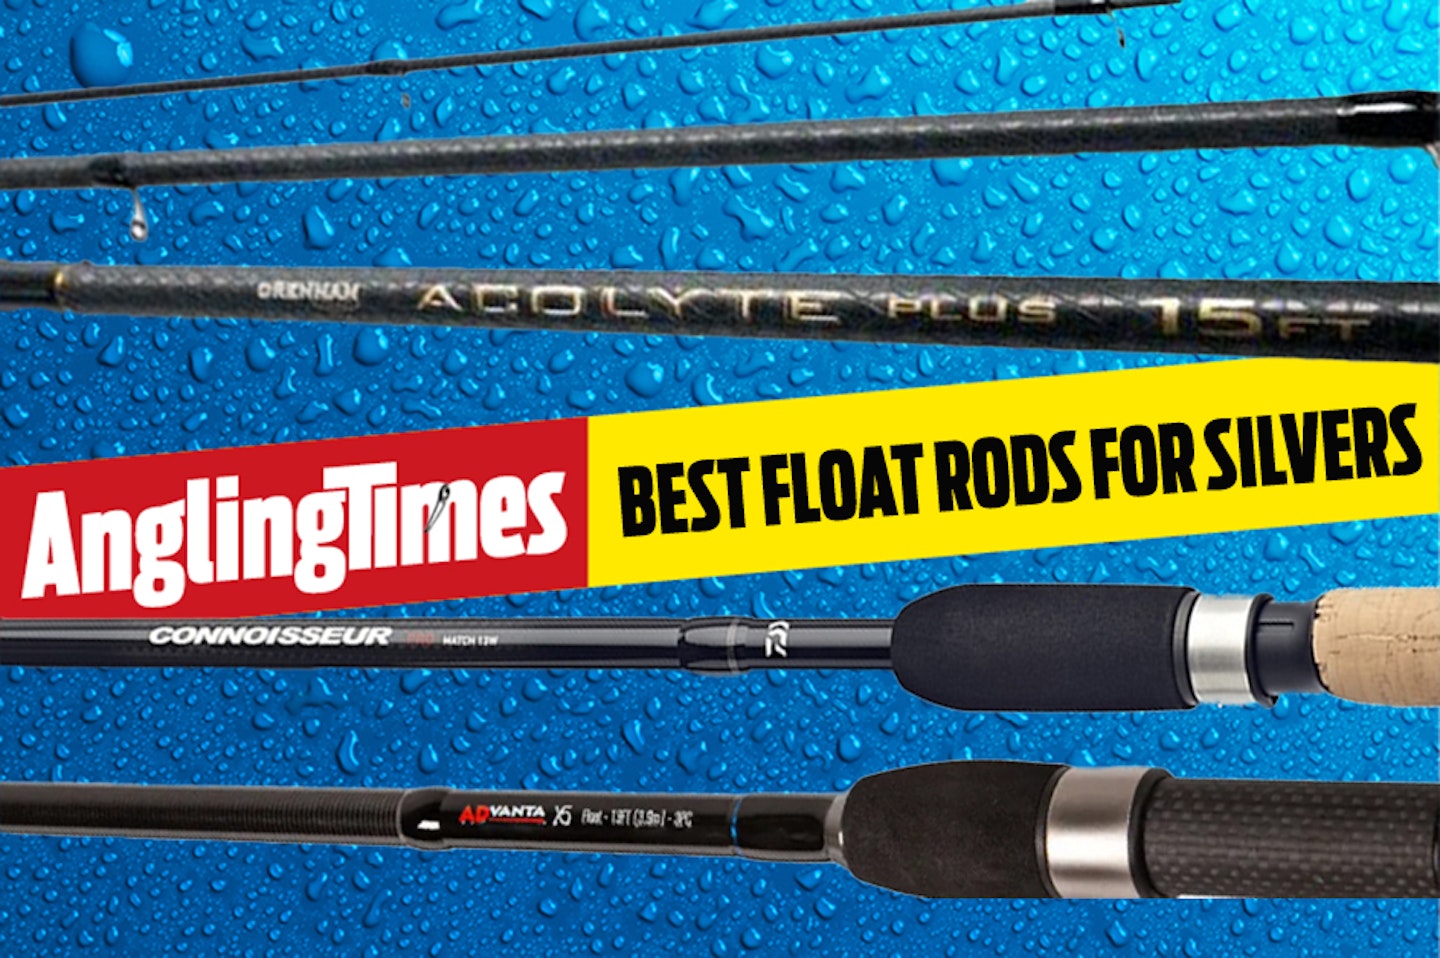 The best float rods for silvers 